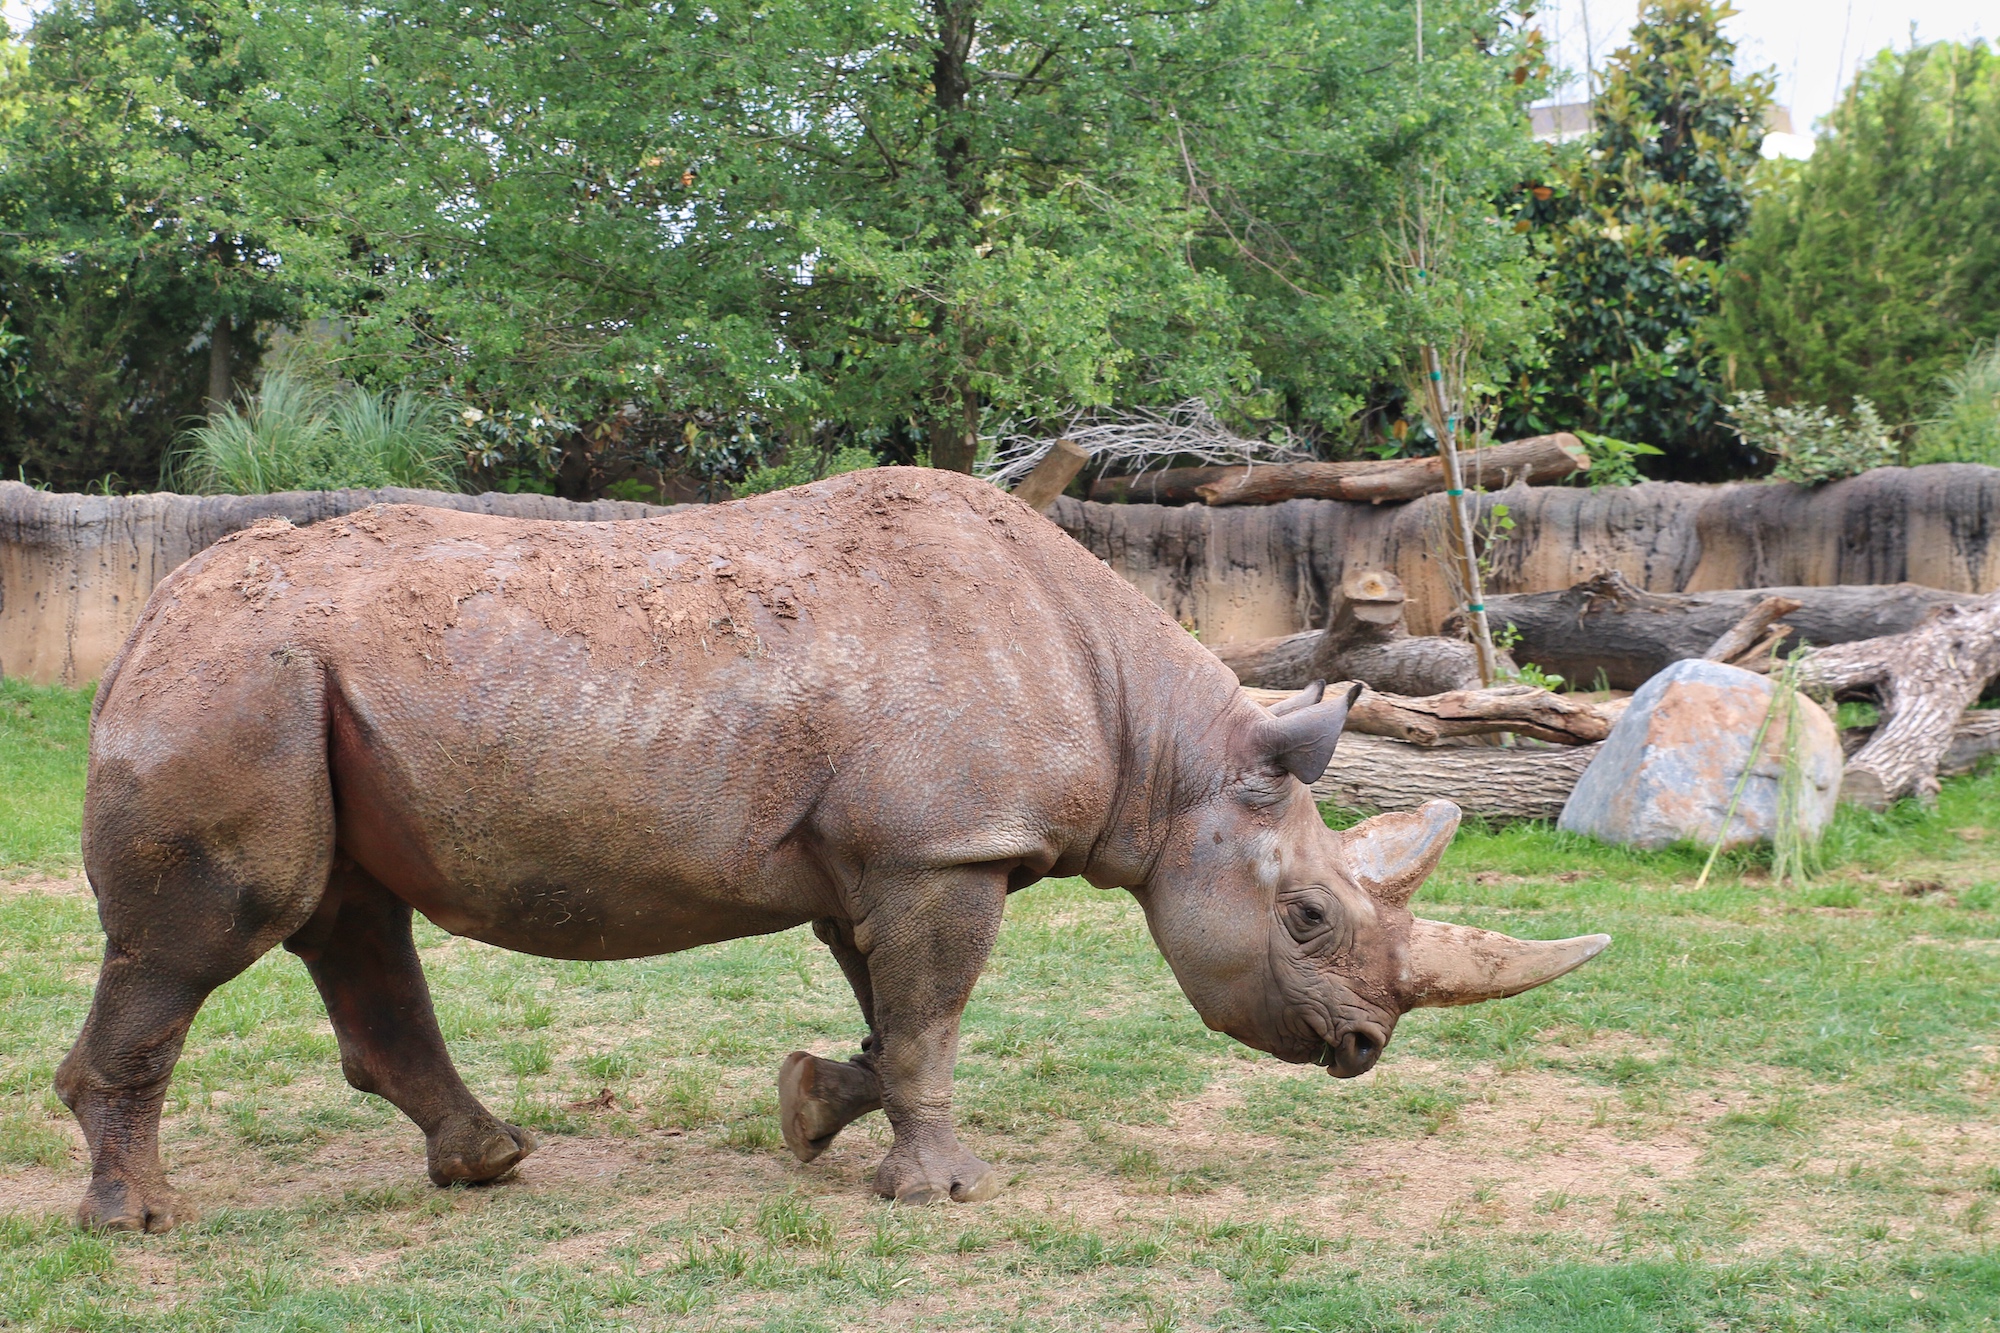 rhino viewing area at Fort Worth zoo